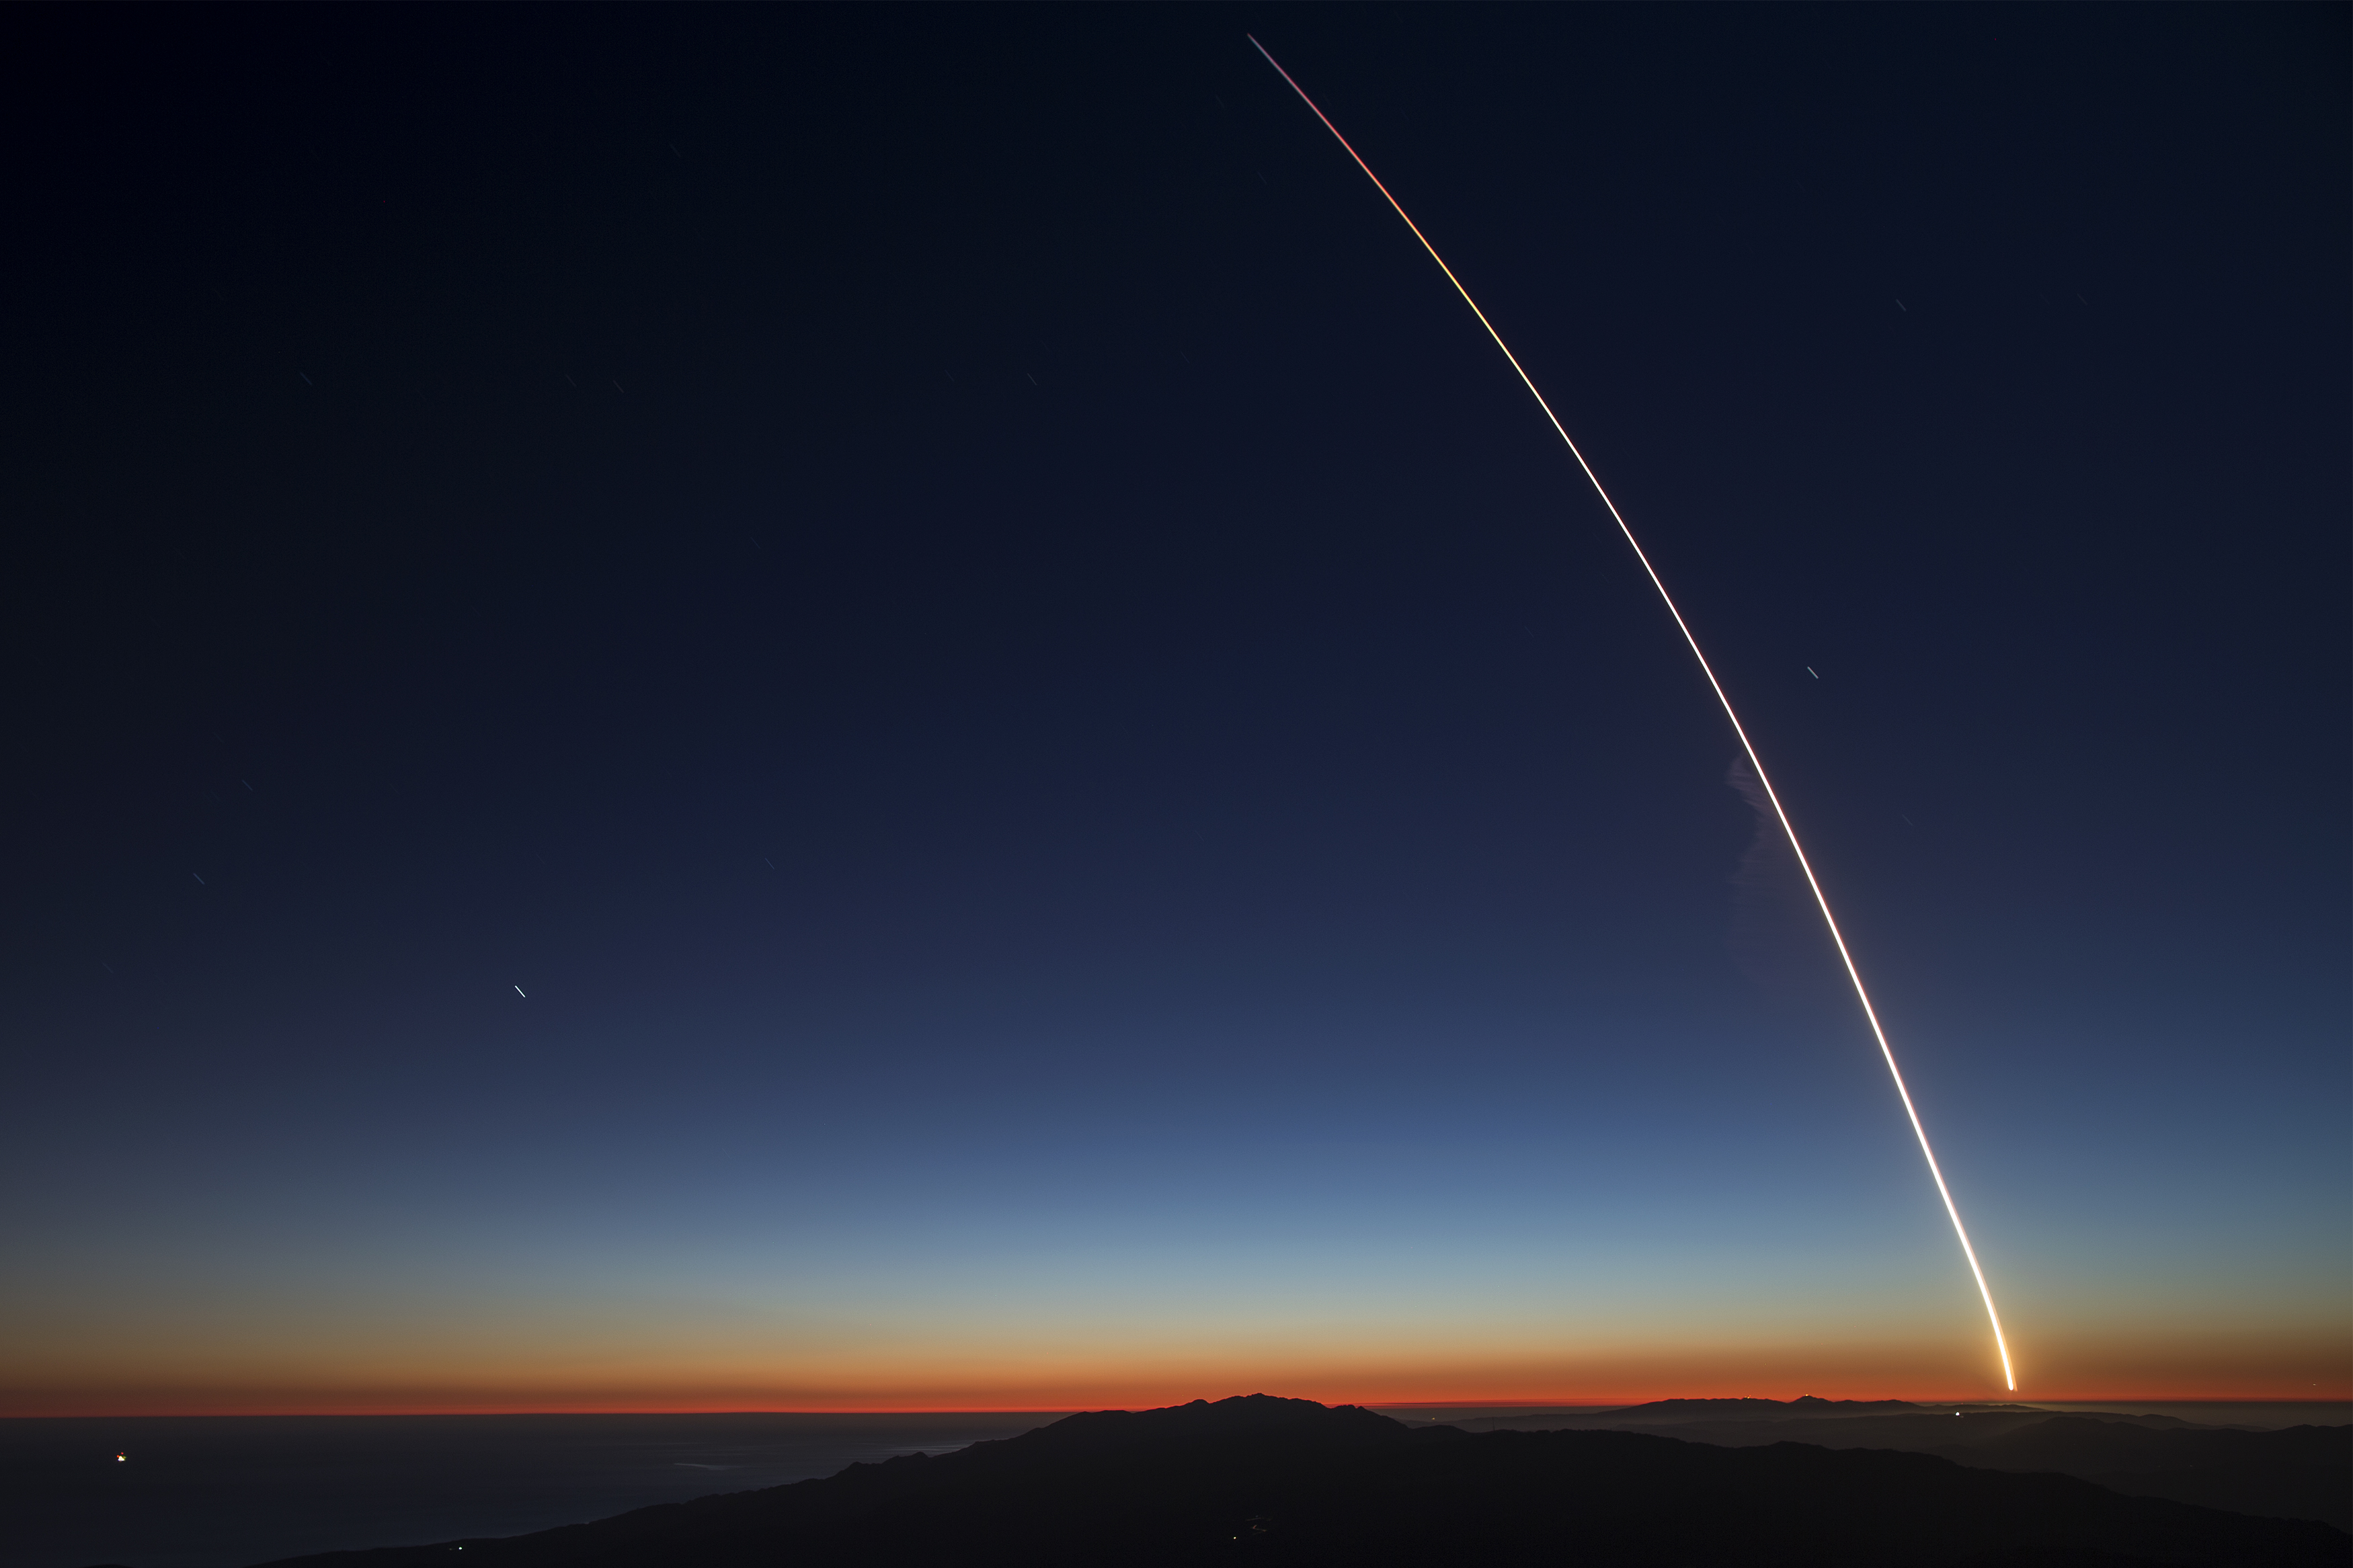 The SpaceX Falcon 9 rocket launches from Vandenberg Air Force Base carrying the SAOCOM 1A and ITASAT 1 satellites, as seen during a long exposure on October 7, 2018 near Santa Barbara, California. (David McNew&mdash;Getty Images)